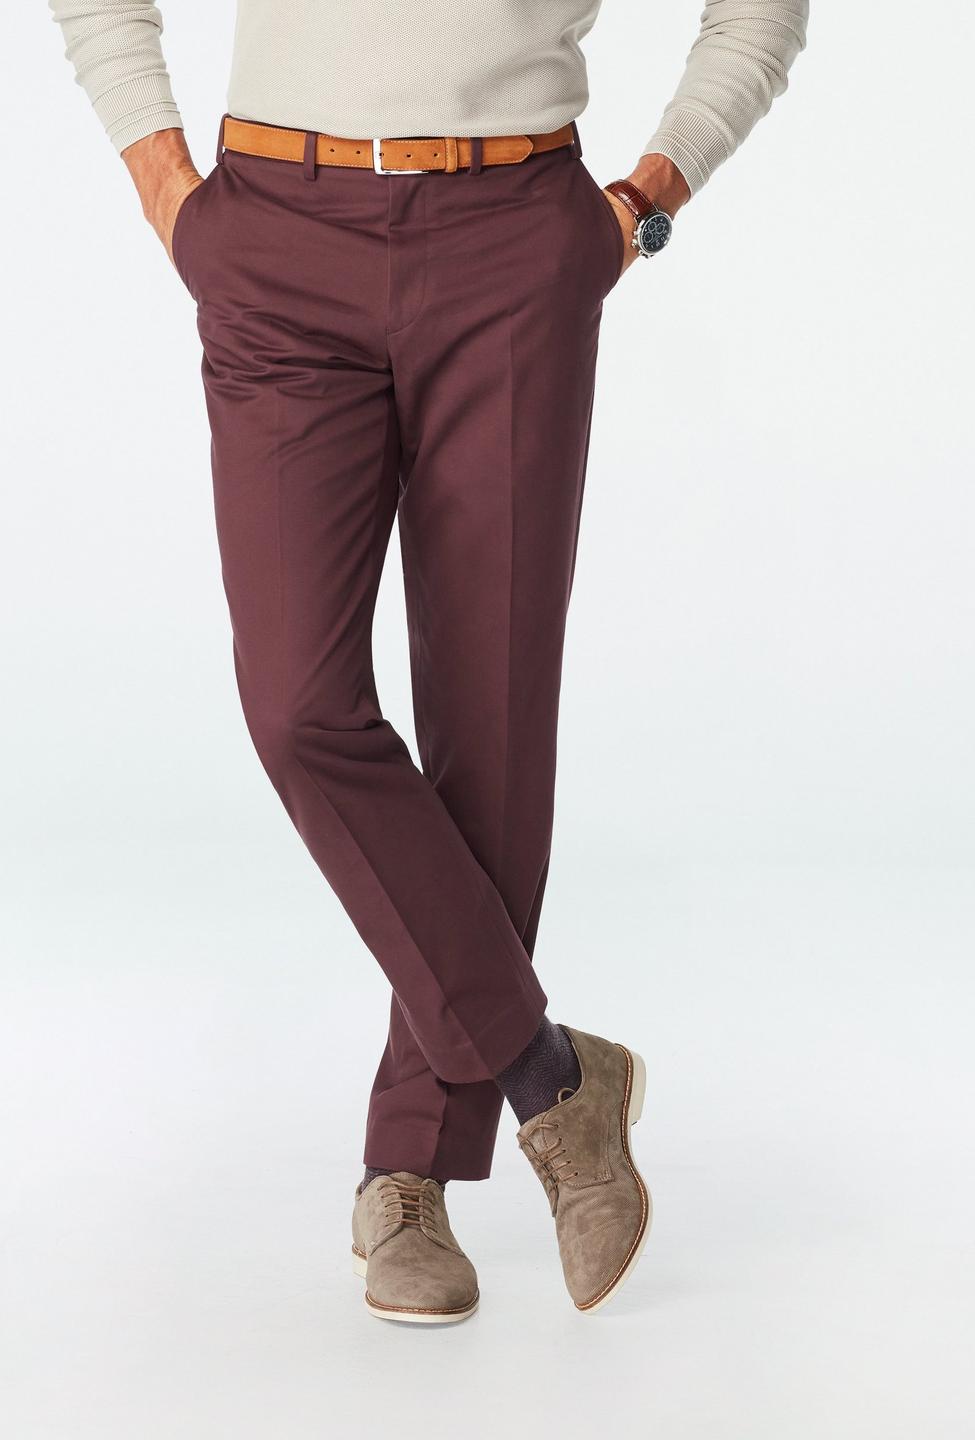 Burgundy pants - Houndslow Solid Design from Premium Indochino Collection